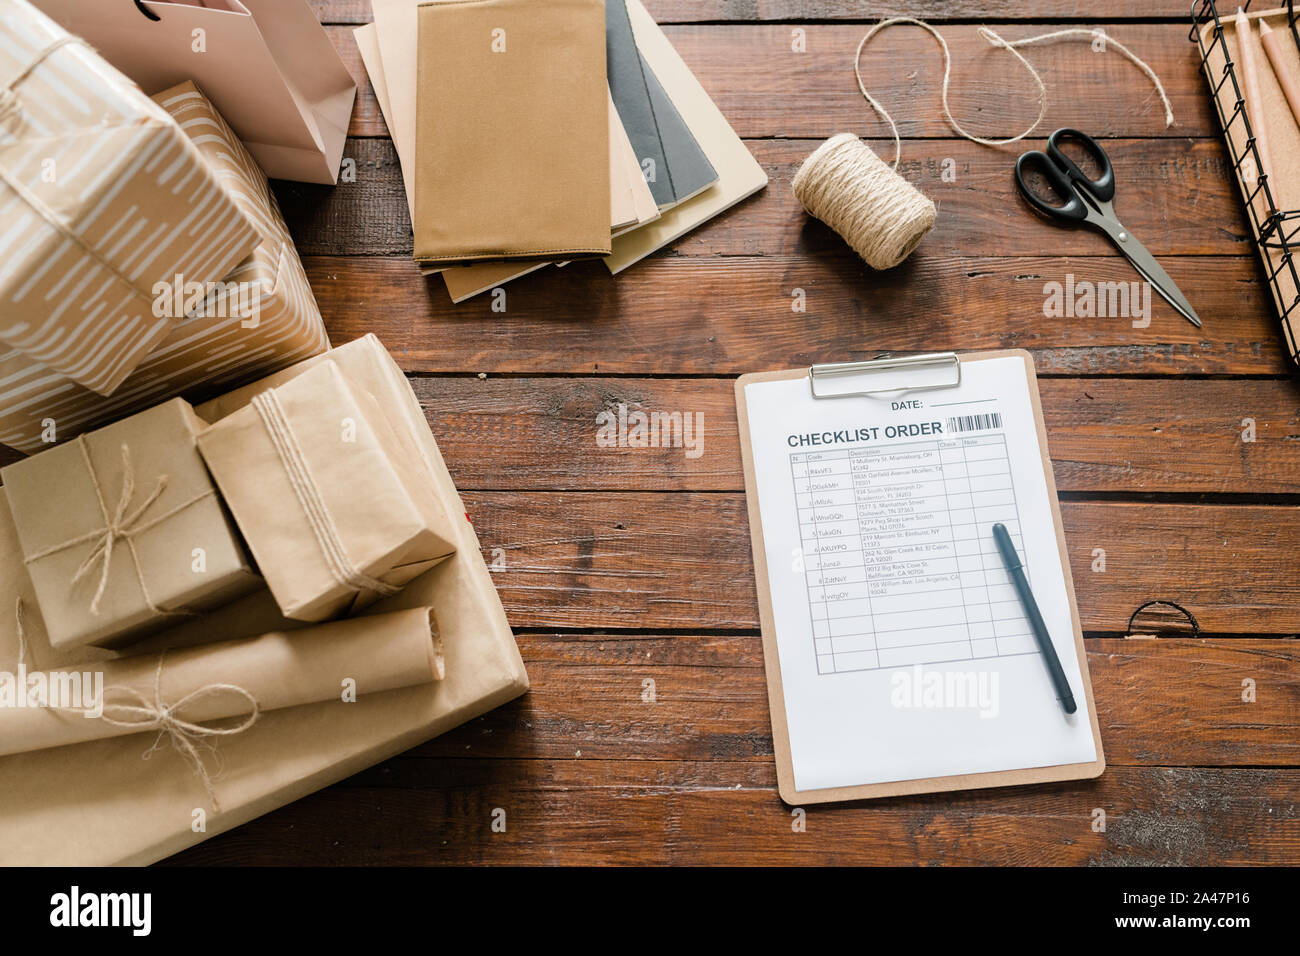 Checklist paper, pen, packed boxes, threads, scissors and stack of notepads Stock Photo